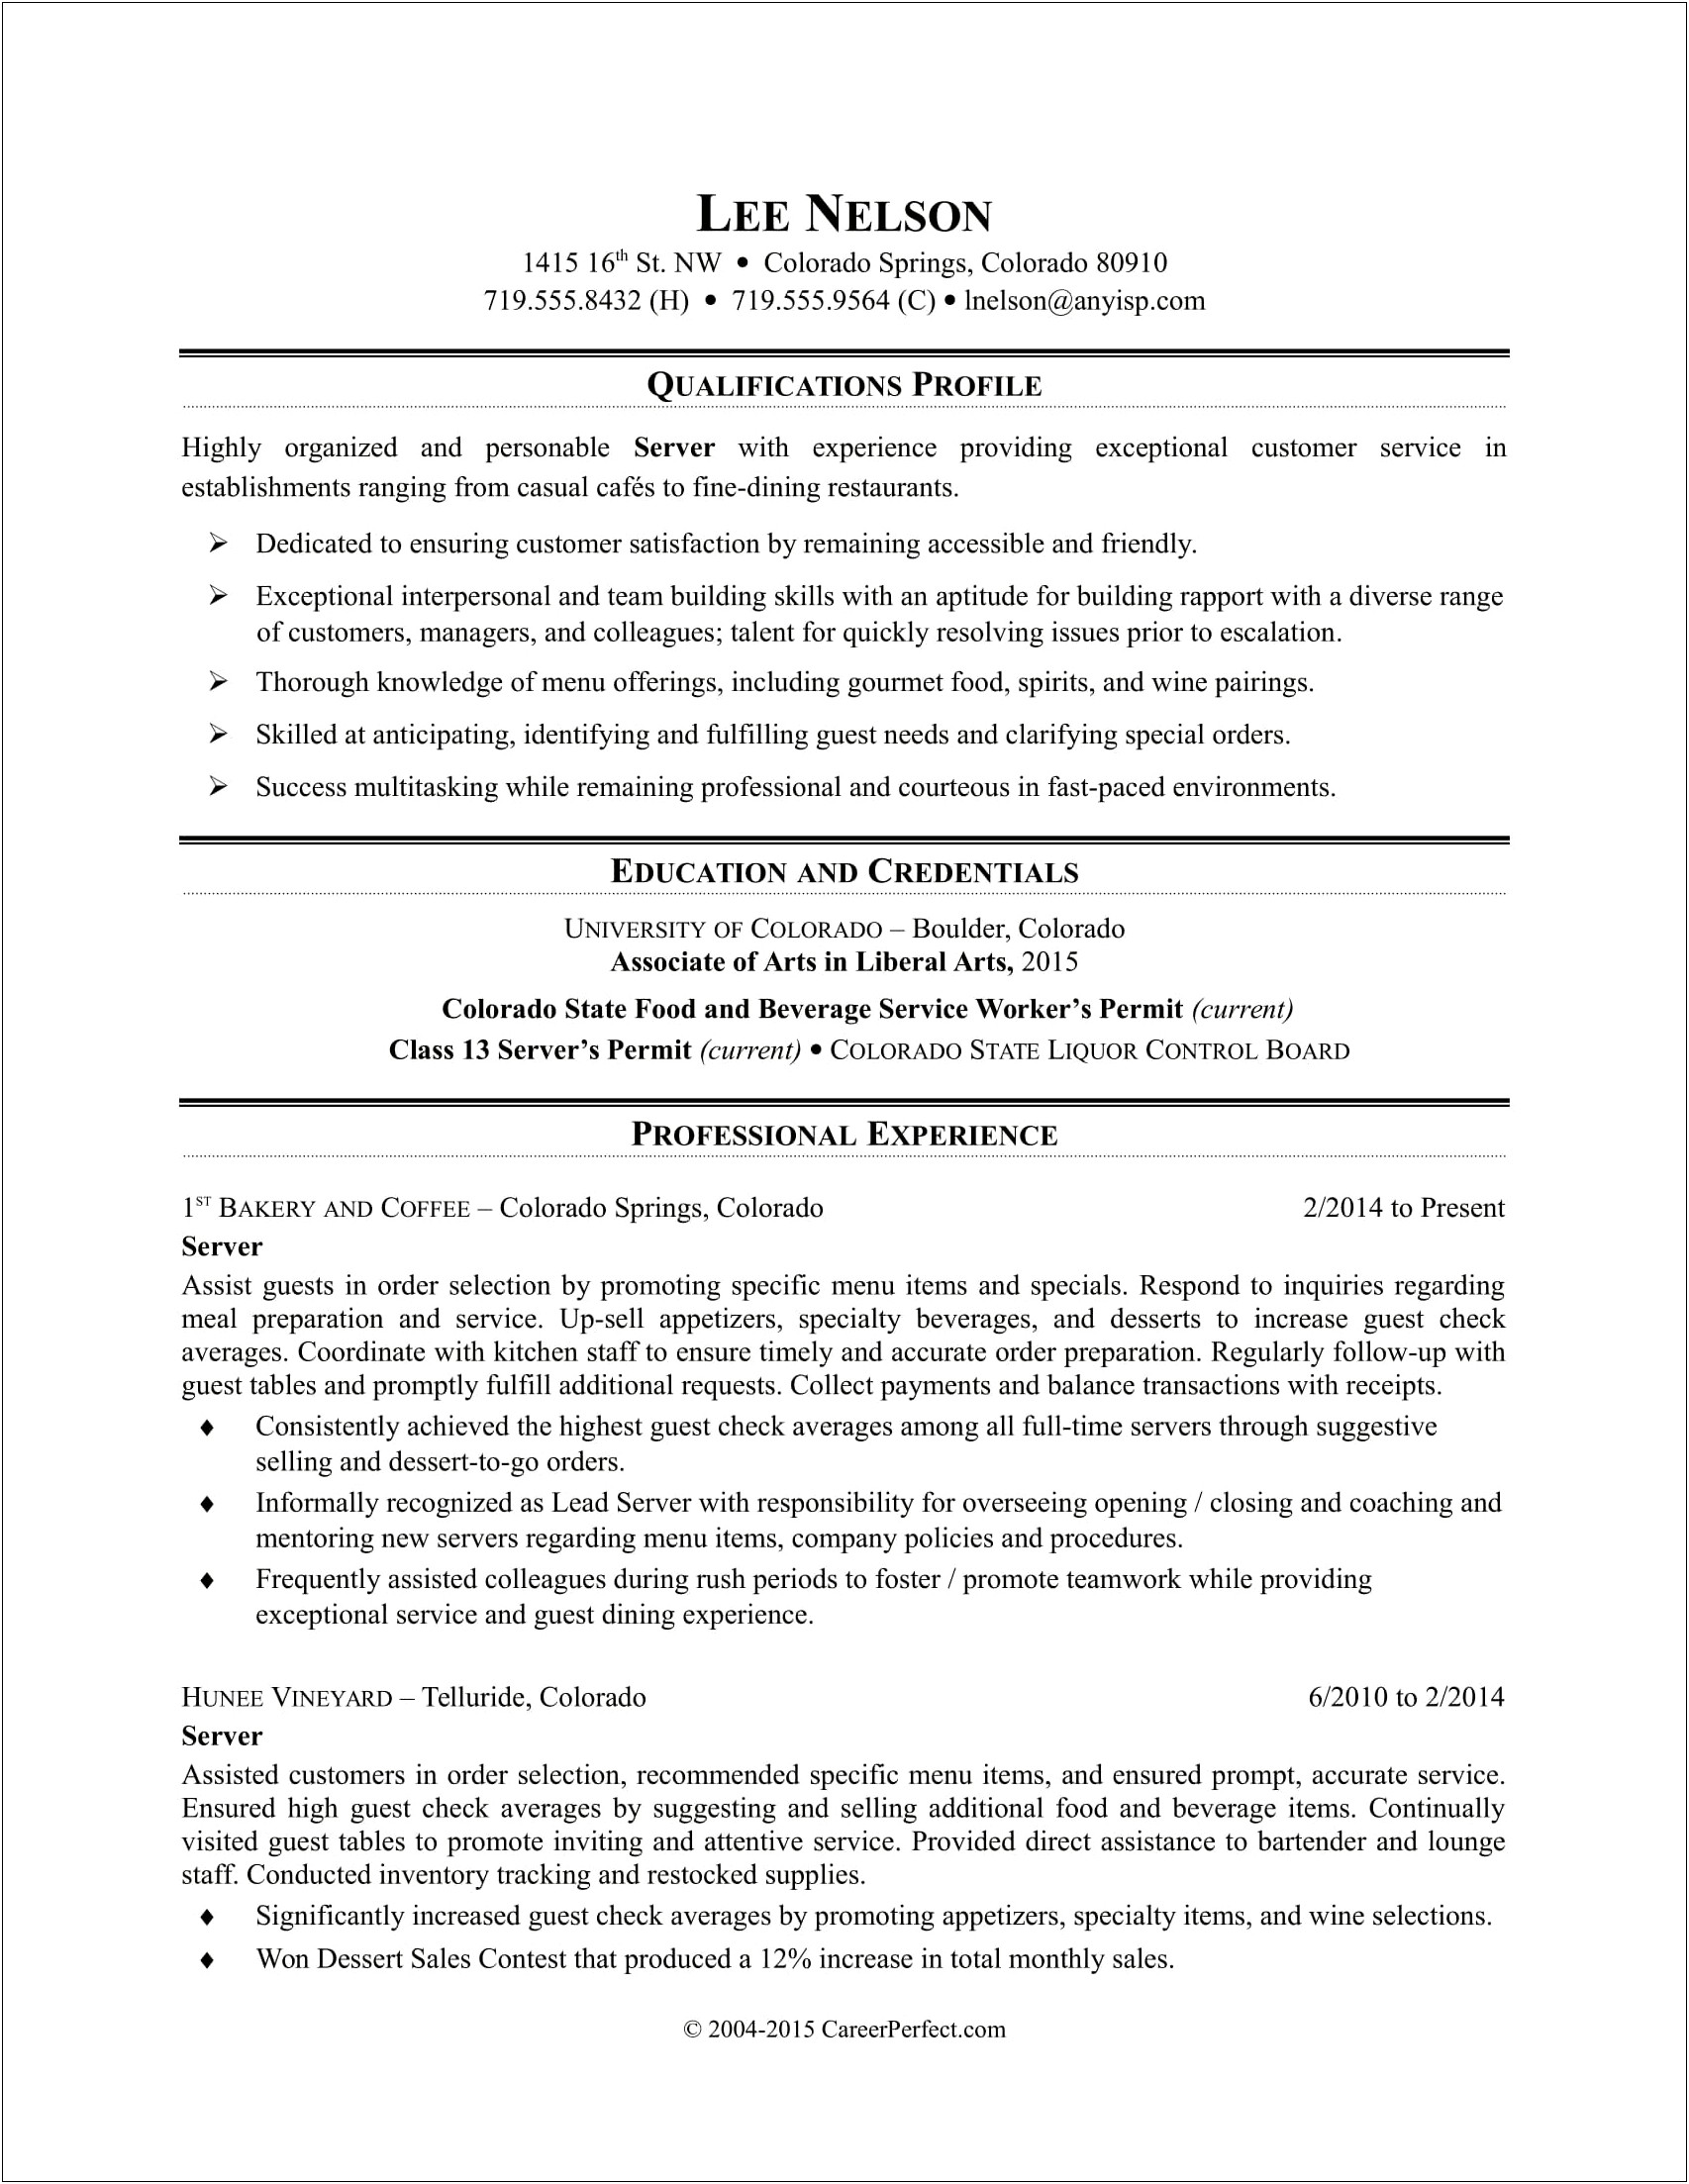 Resume Looking For A Waitress Job